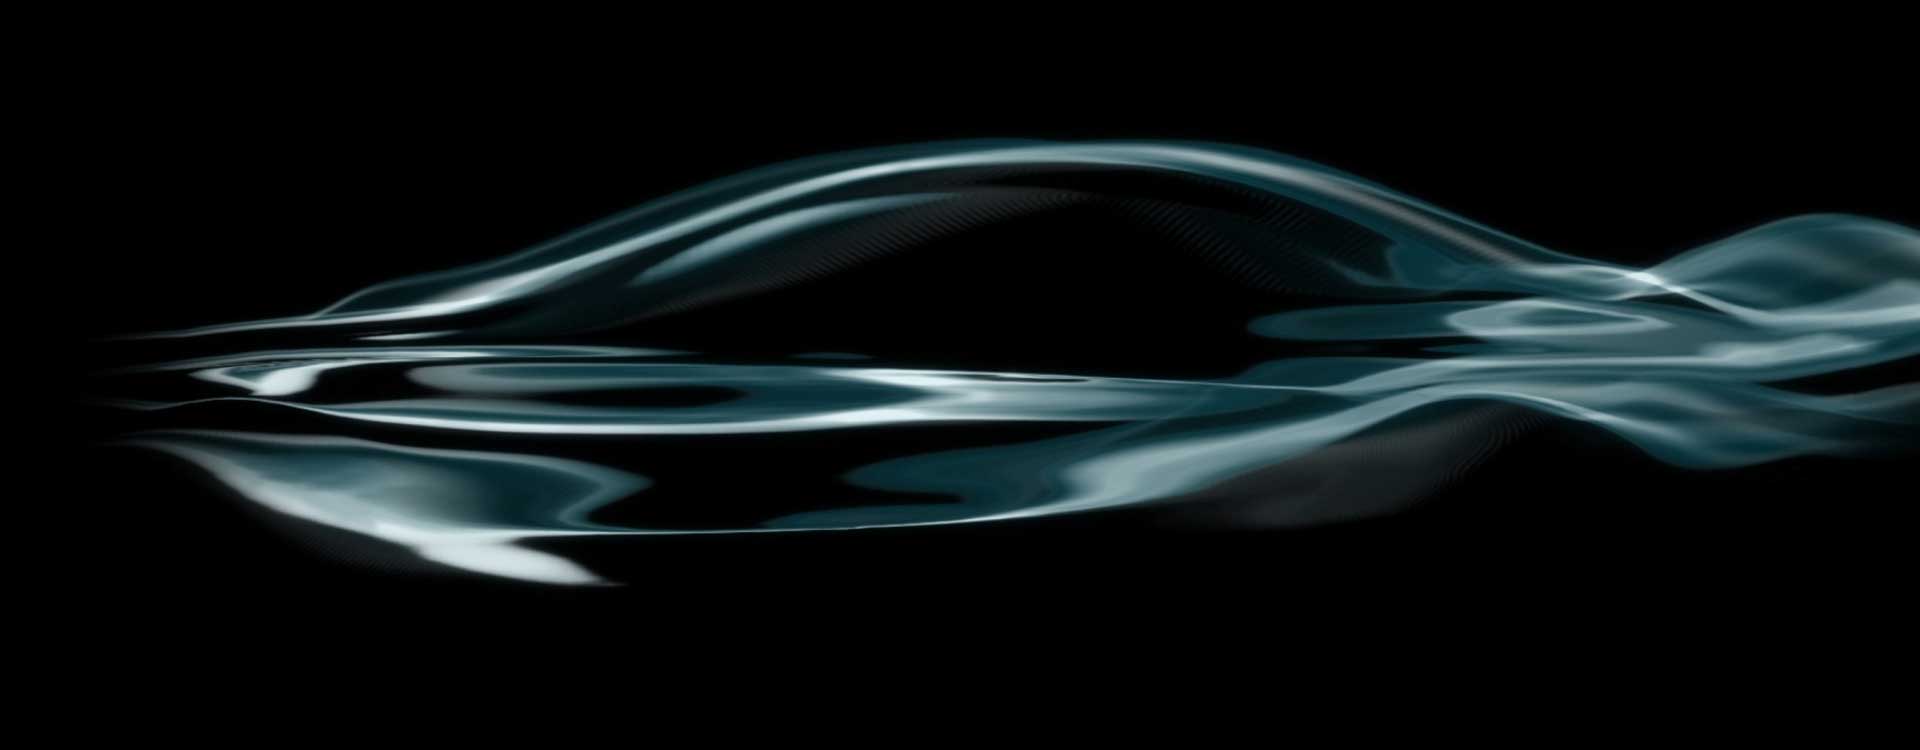 Carshape CGI effect. Still from Mercedes-Benz Commercial.